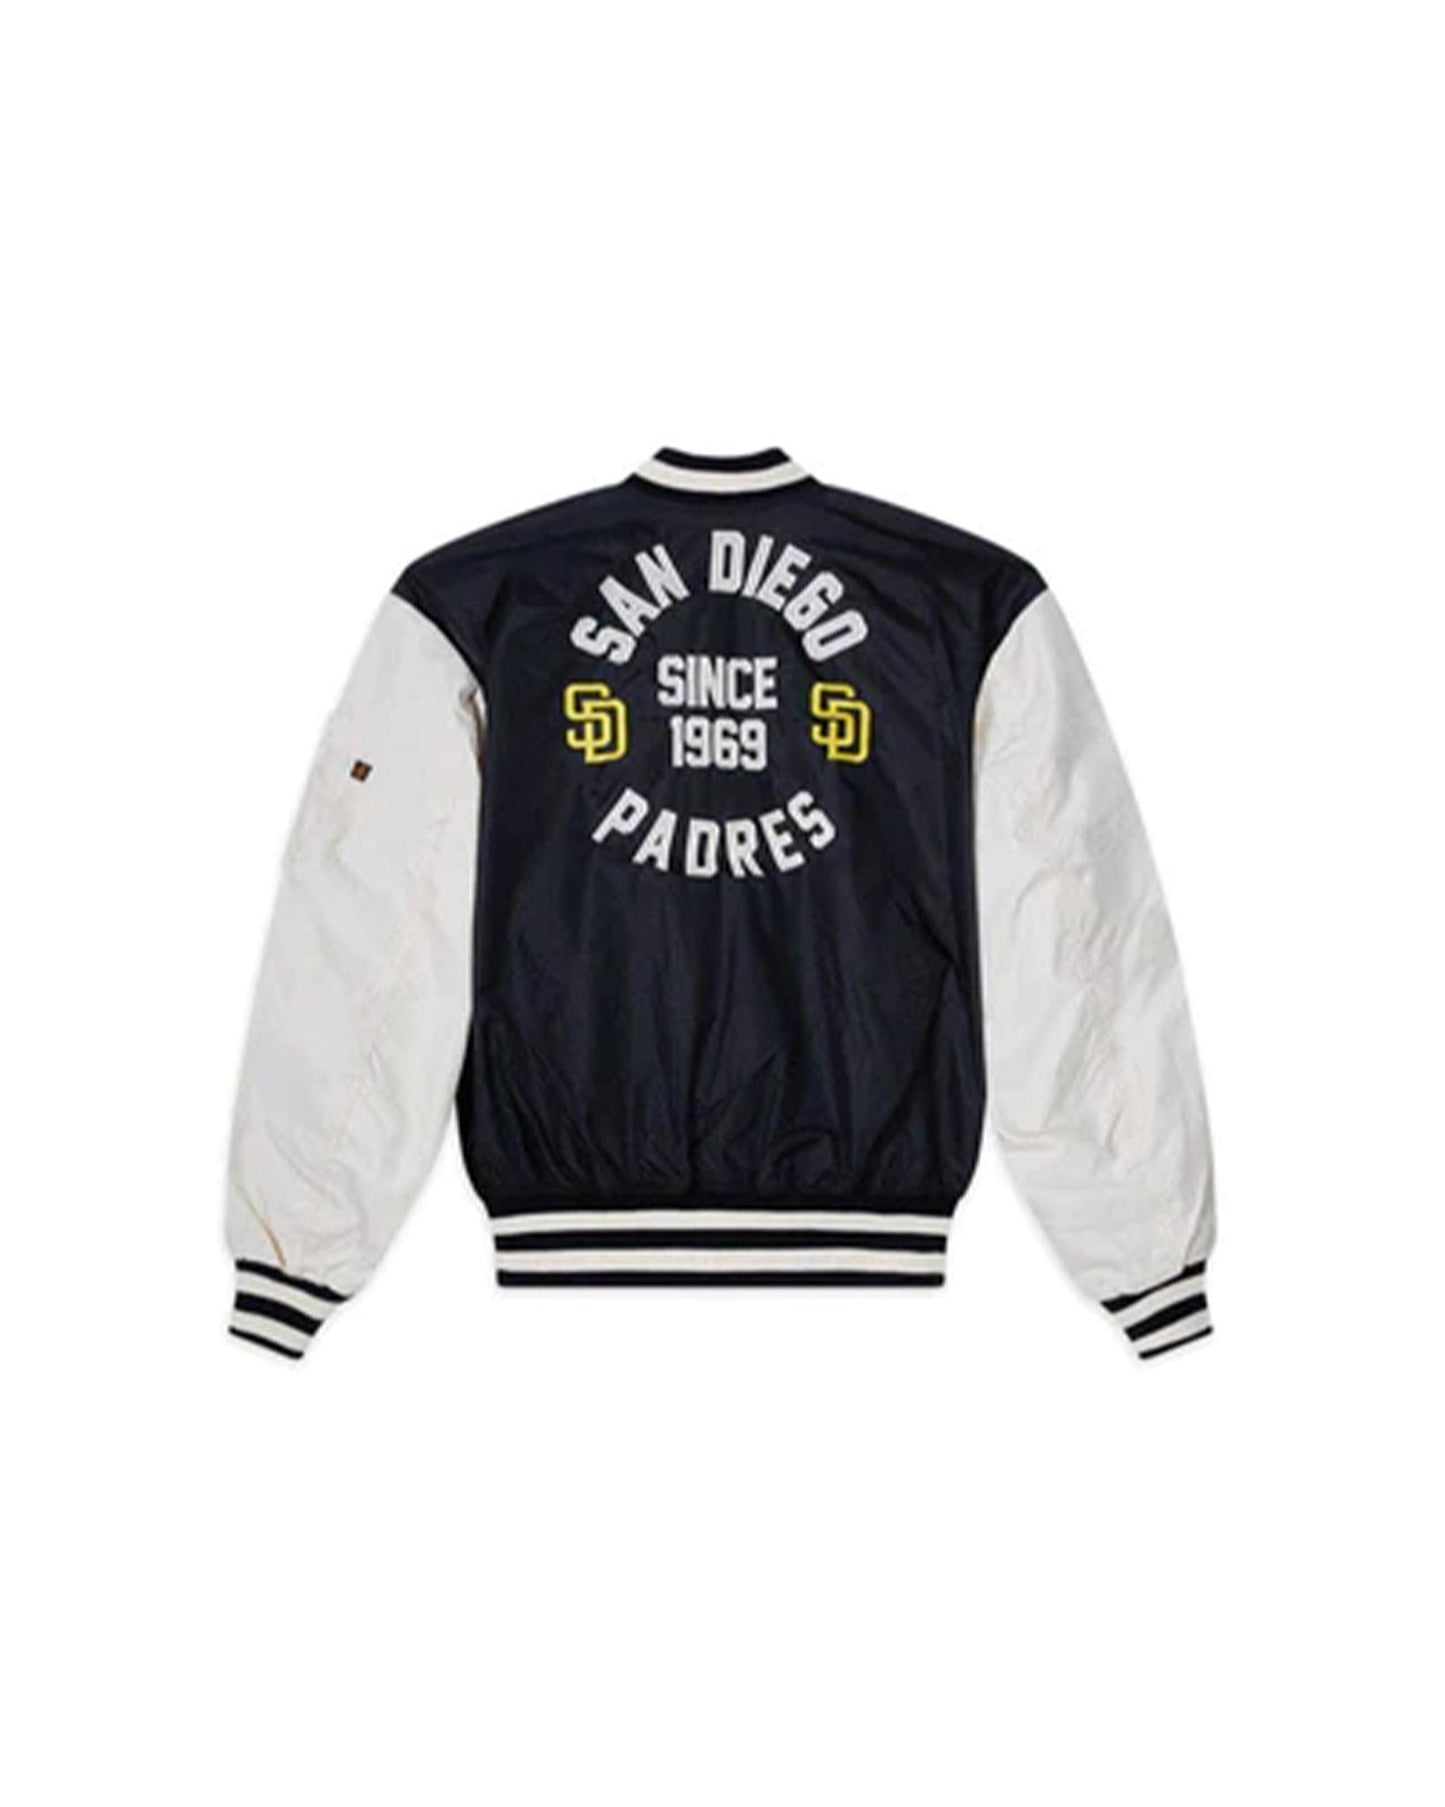 vintage sf giants varsity jacket - clothing & accessories - by